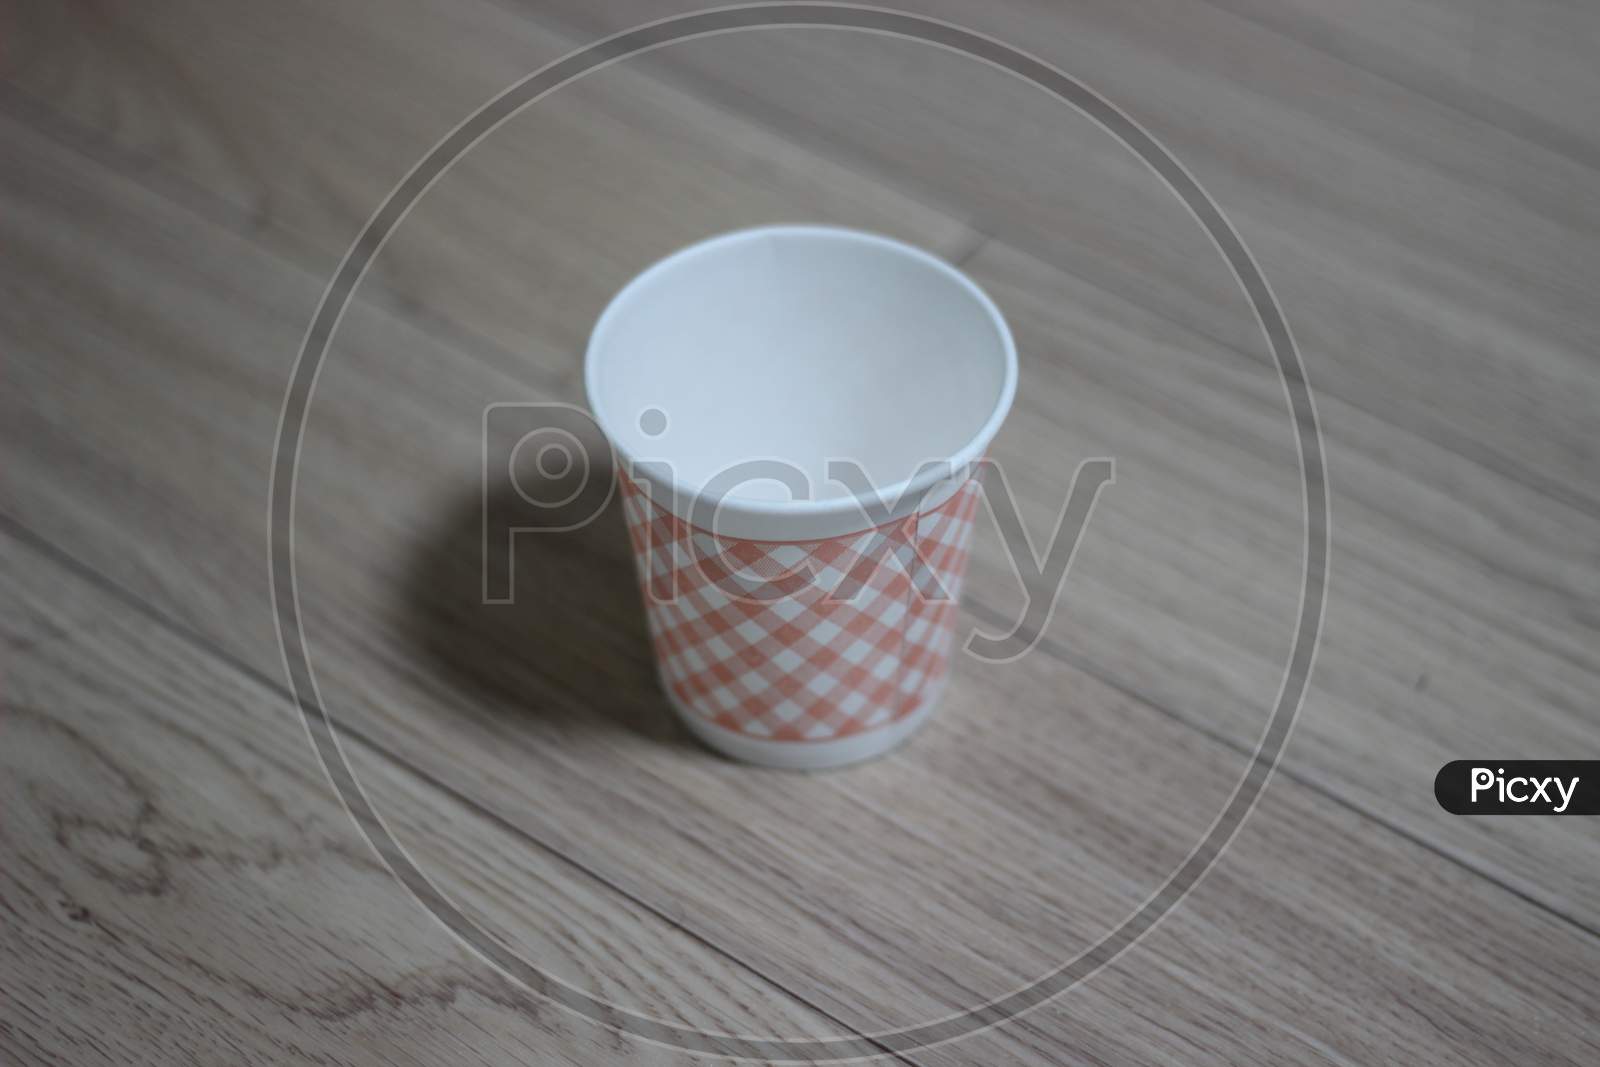 Disposable Paper Cups On The Wooden Floor